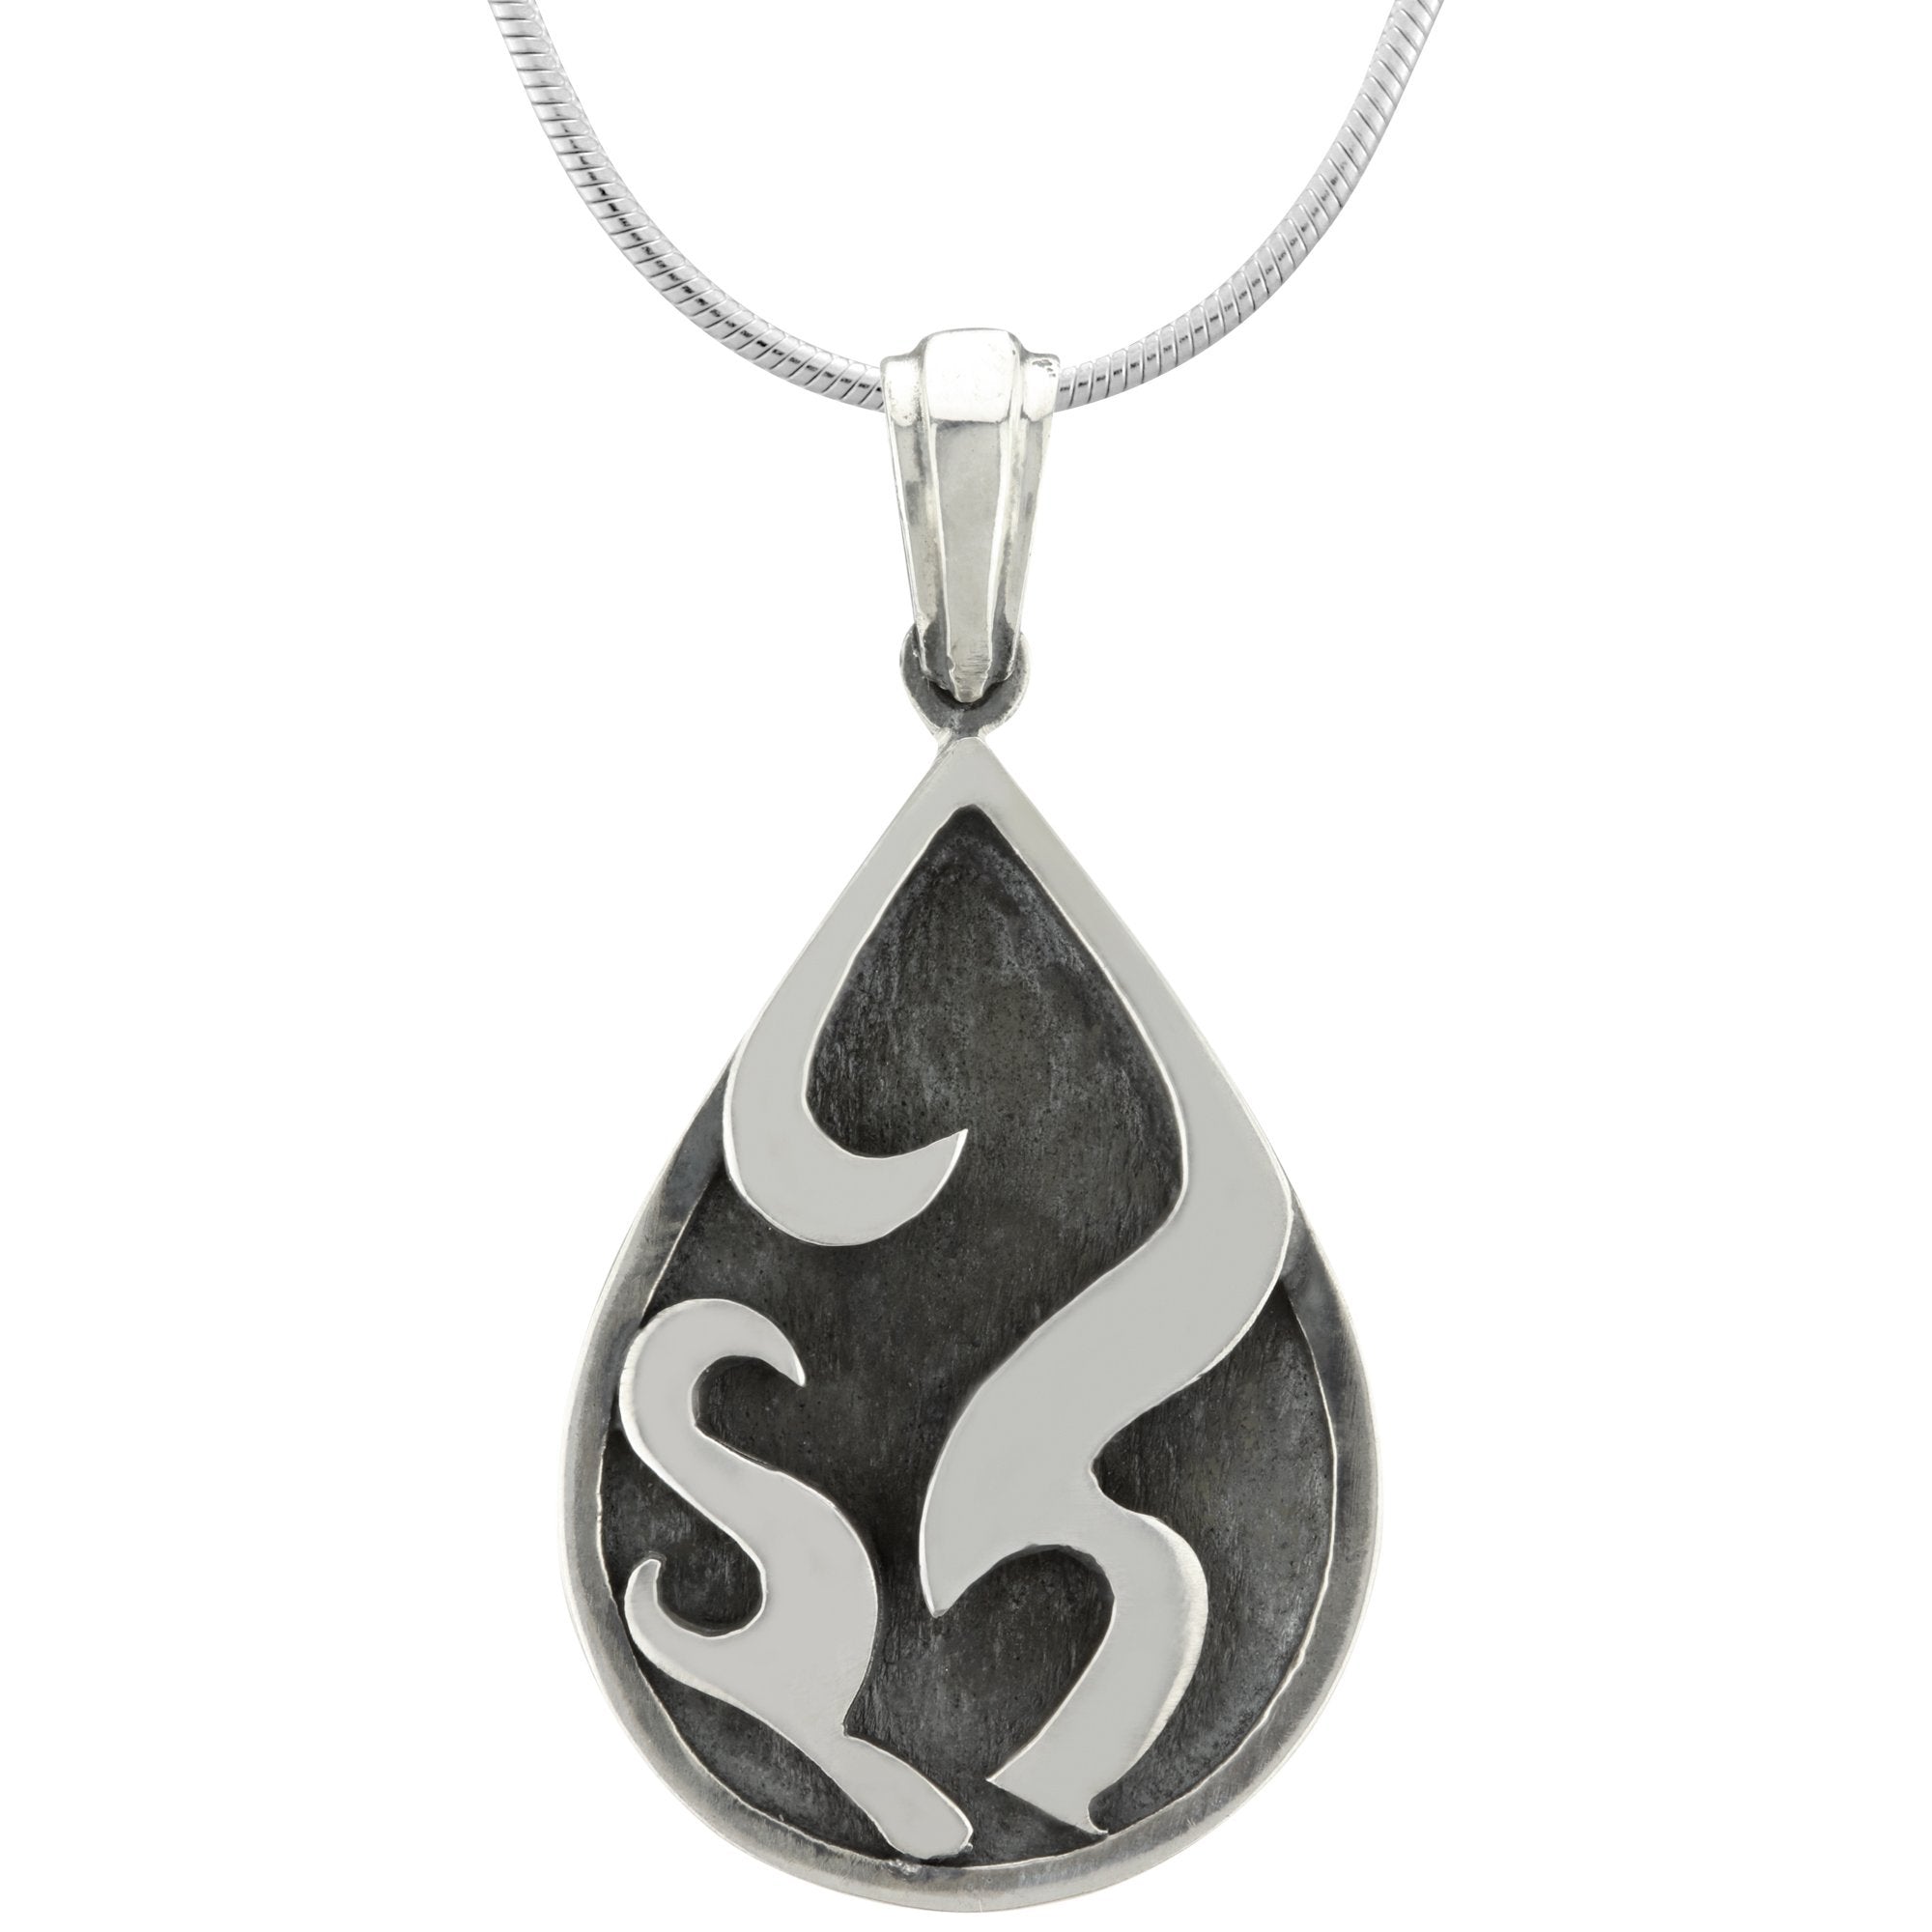 Flames Drop Sterling Necklace - Pendant Only